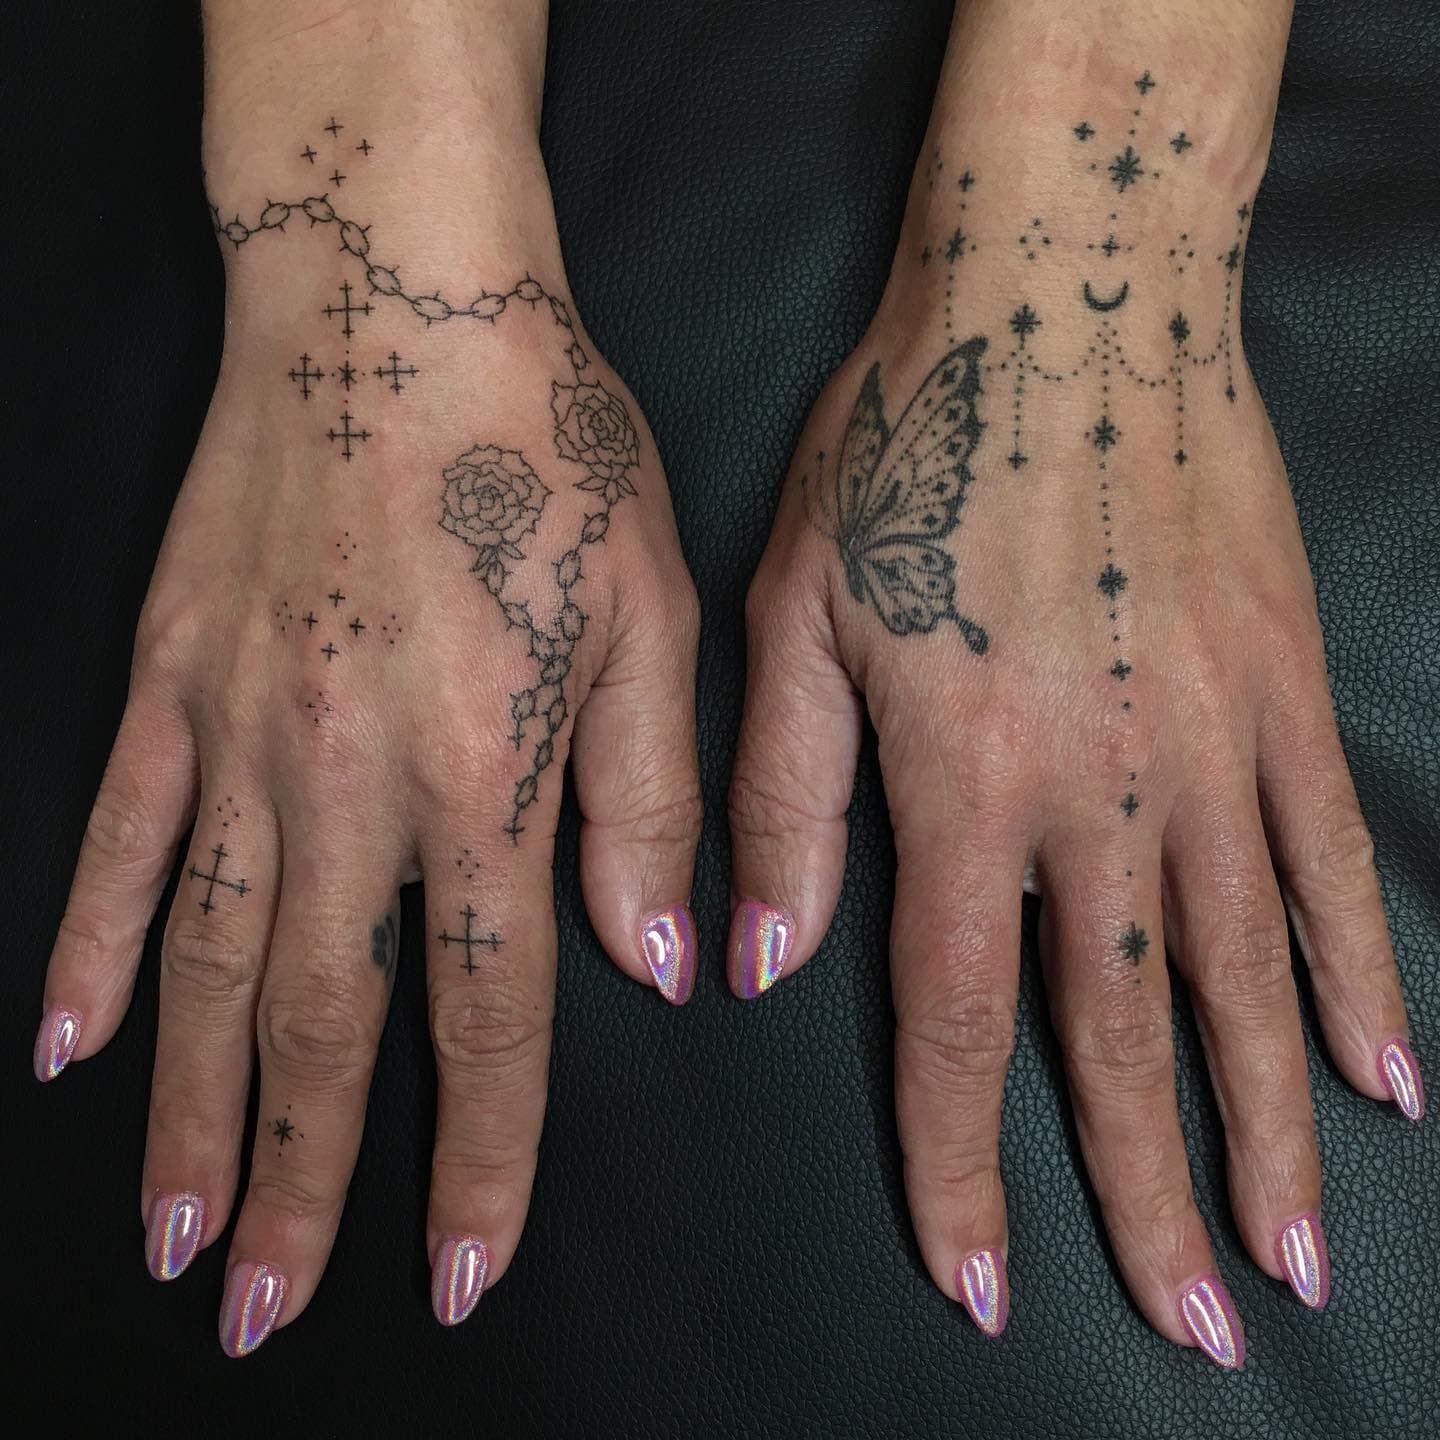 Stick and Poke Tattoo: Why Not to Give Yourself Body Art at Home